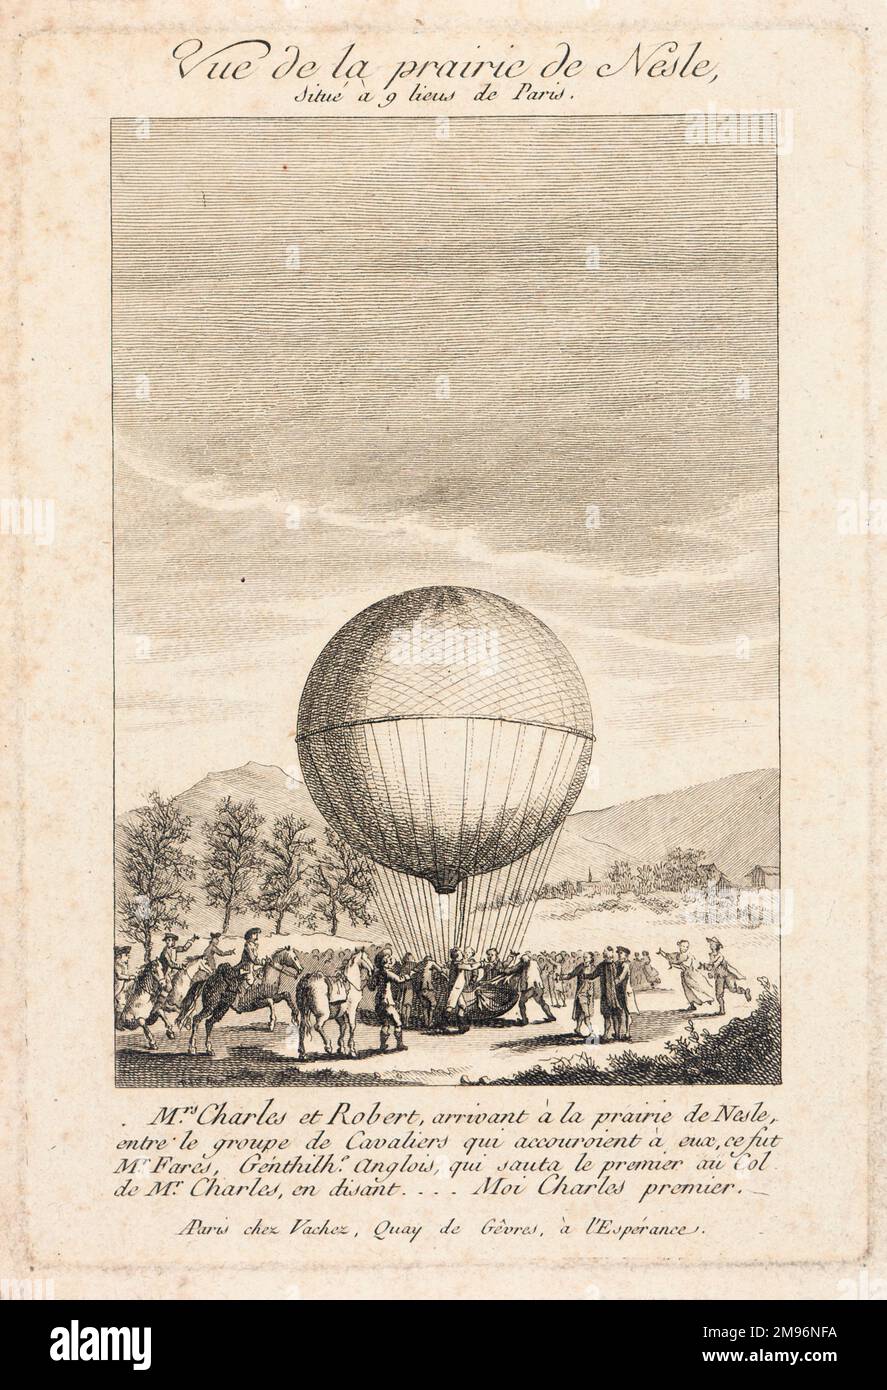 Balloon descent of Charles and Robert onto the Prairie de Nesle, northern France, surrounded by various witnesses, including an English gentleman, Mr Fares, who was the first to greet M Charles.  They had taken off from the Tuileries Gardens, Paris. Stock Photo